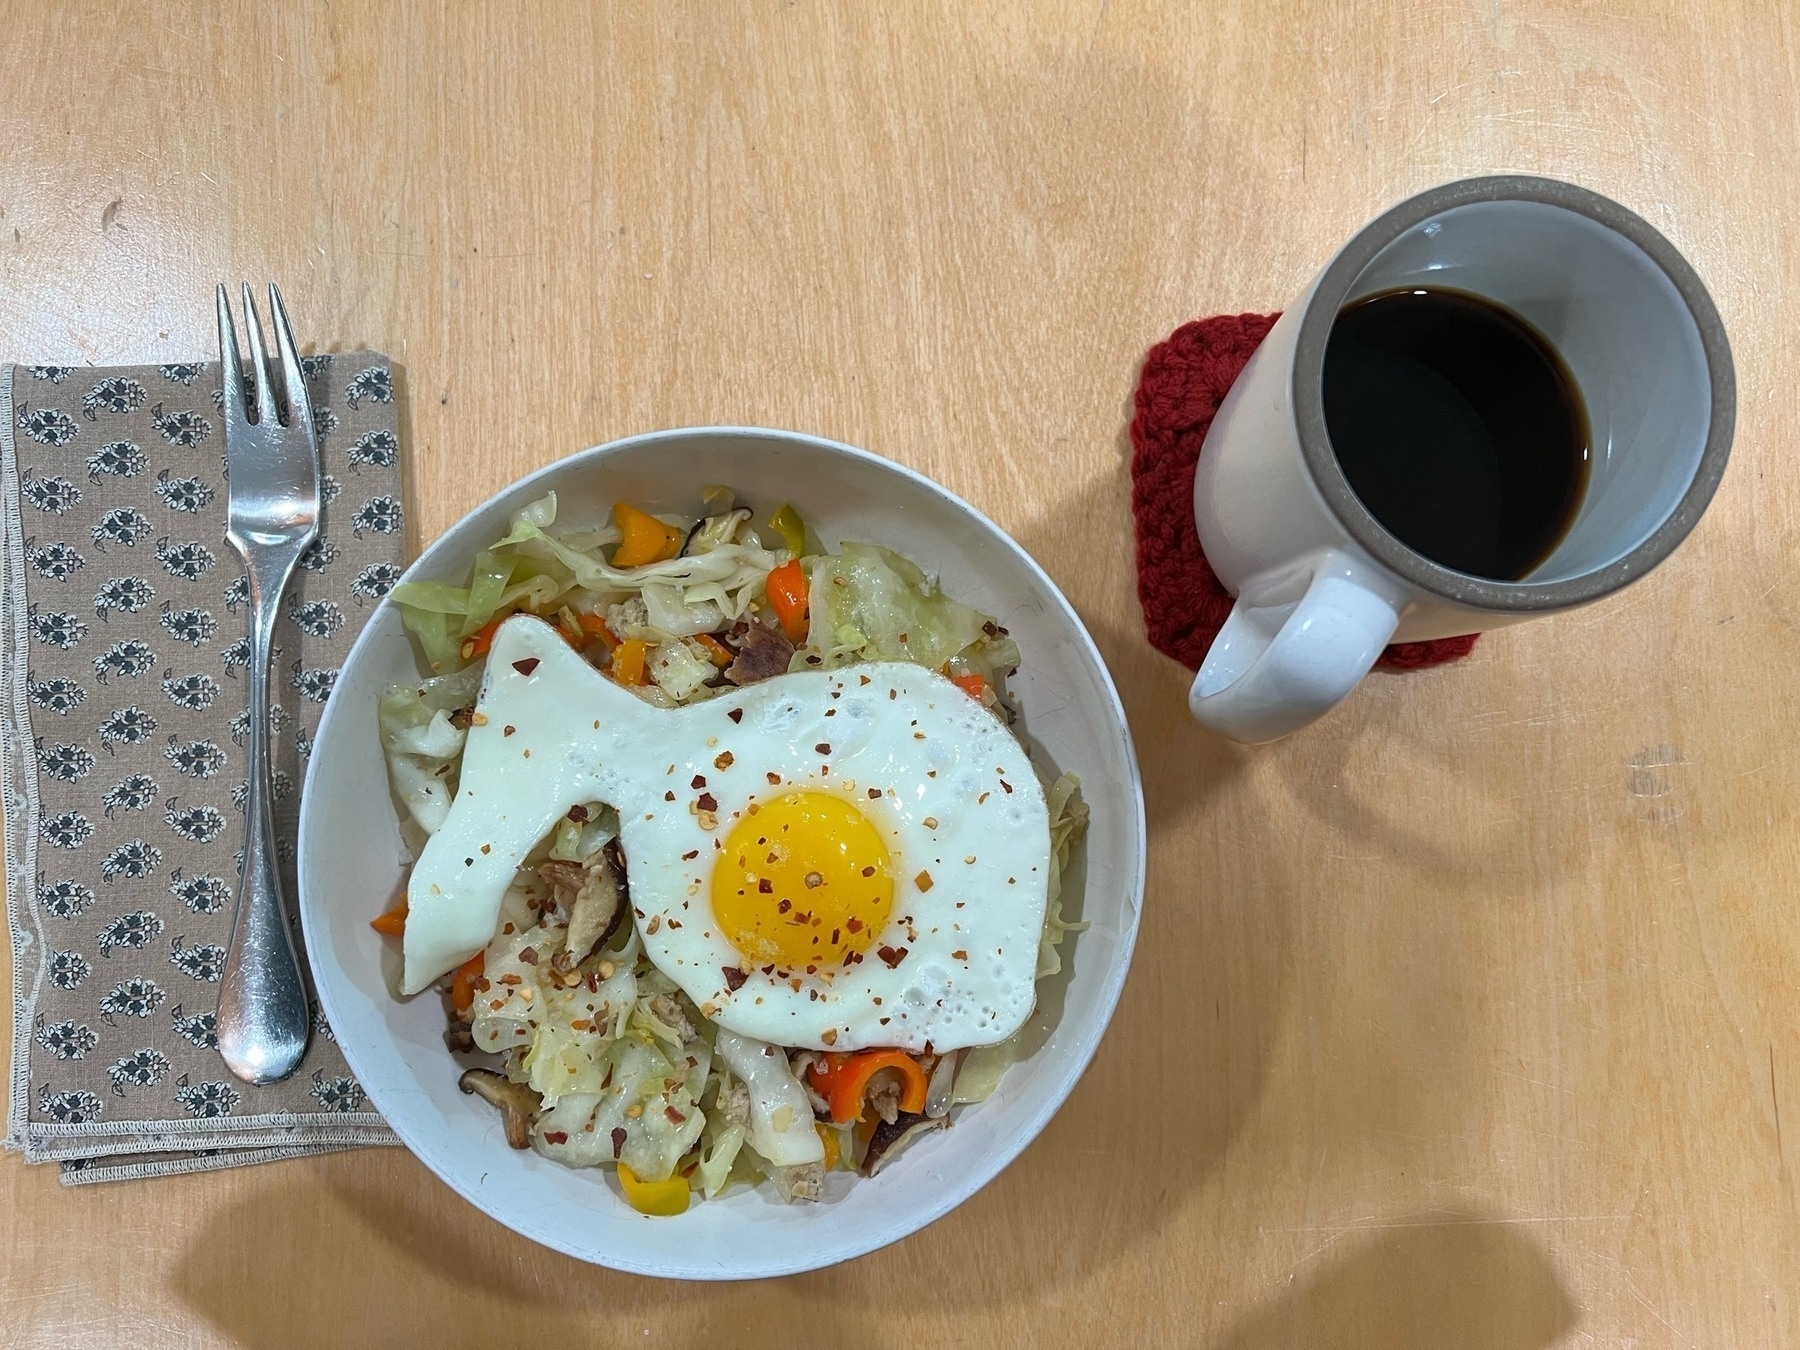 Top down view of a bowl of sautéed cabbage, peppers, and a sunny side up egg. Coffee in a white ceramic cup, a fork on a cloth napkin. 